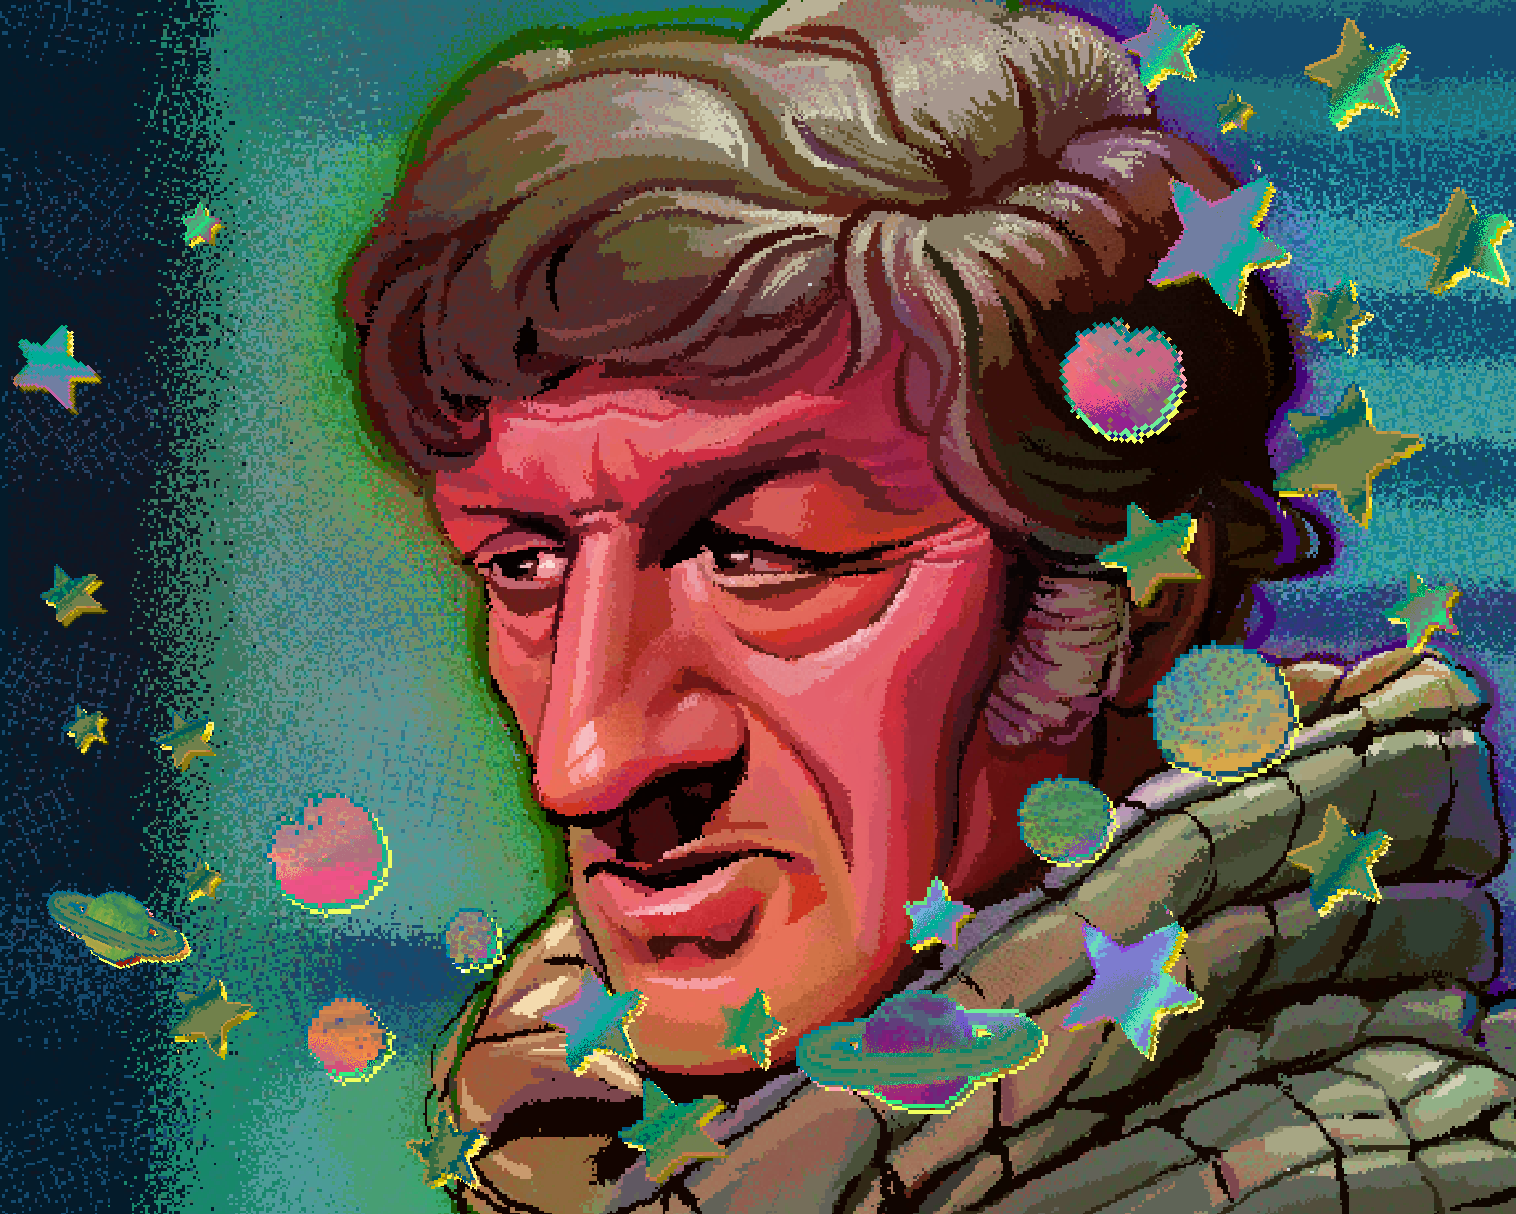 Pixel art drawing from the Doctor Who episode 'Ambassadors of Death'. It shows the third Doctor looking angry in a space suit as he looks off screen. He has wavy gray hair and sideburns, and in this drawing his skin looks orange. There are also fake 'stickers' on top of the image showing stars, planets, and the sonic screwdriver.